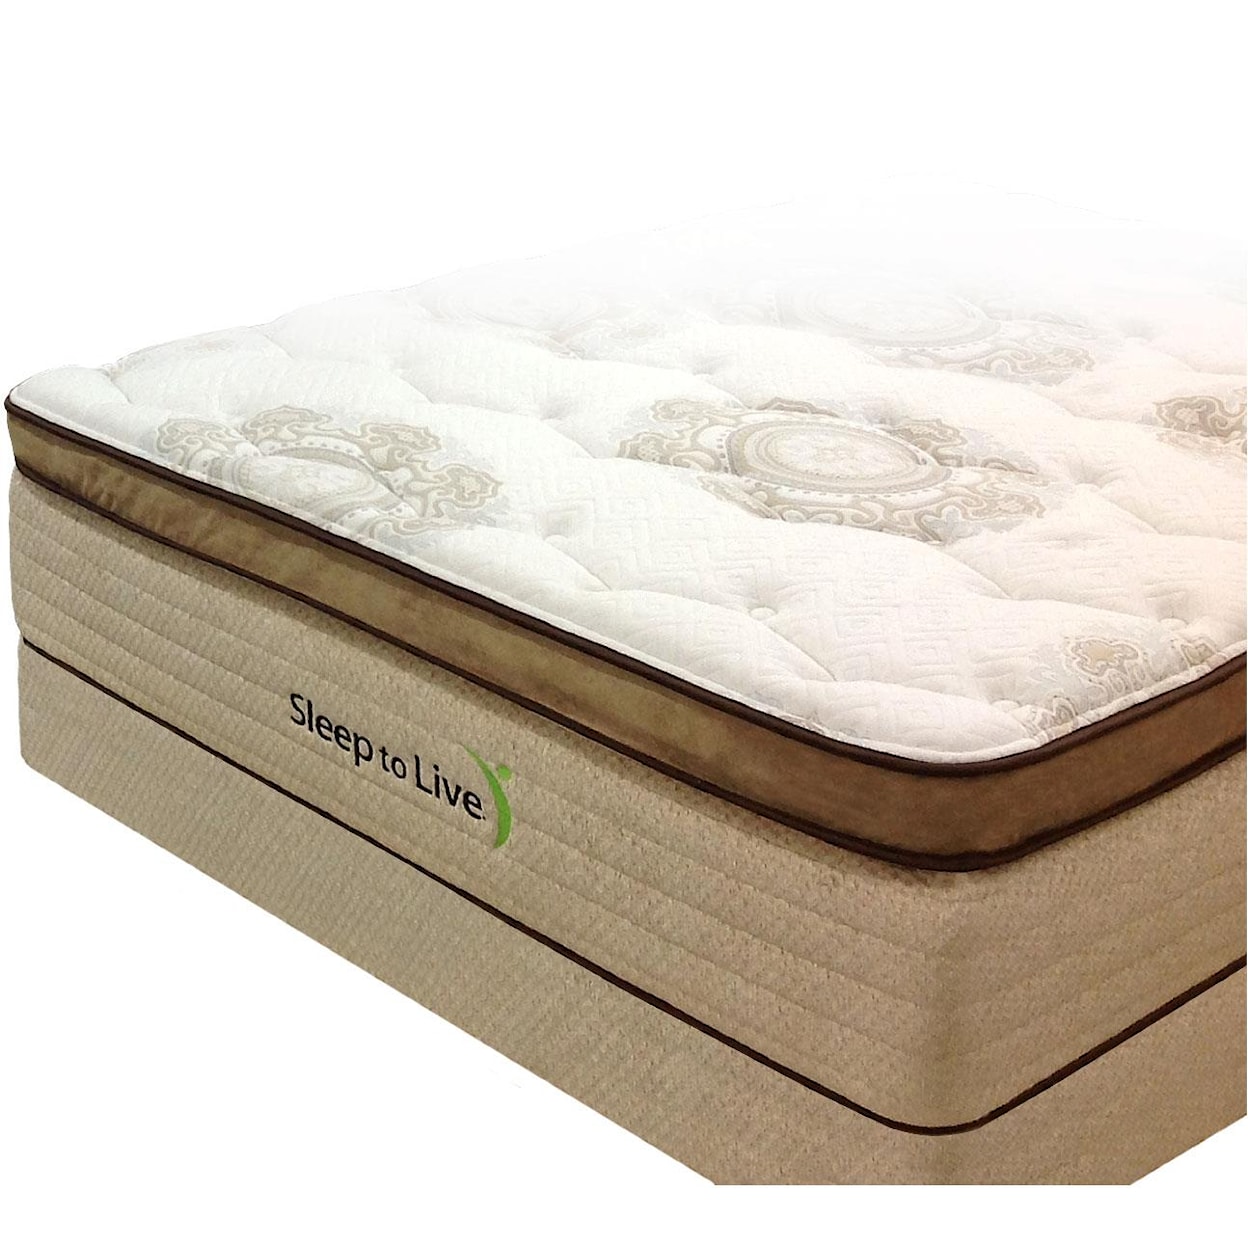 Kingsdown Body System 3 Queen Pocketed Coil Mattress Set